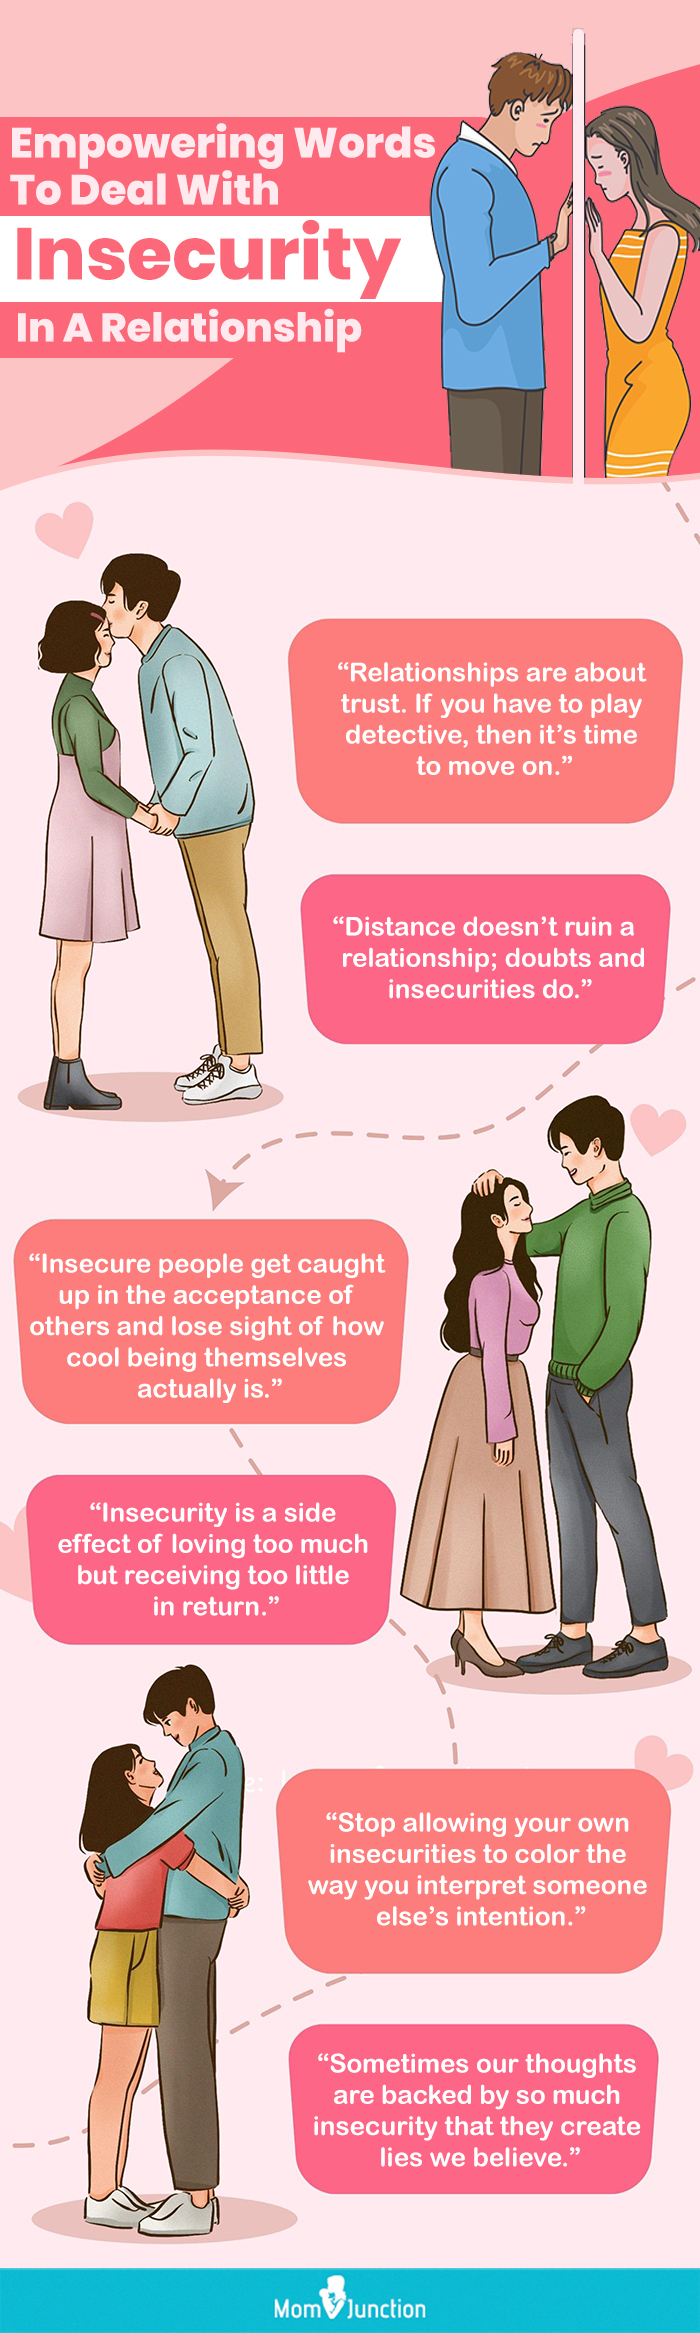 empowering words to deal with insecurity in a relationship (infographic)